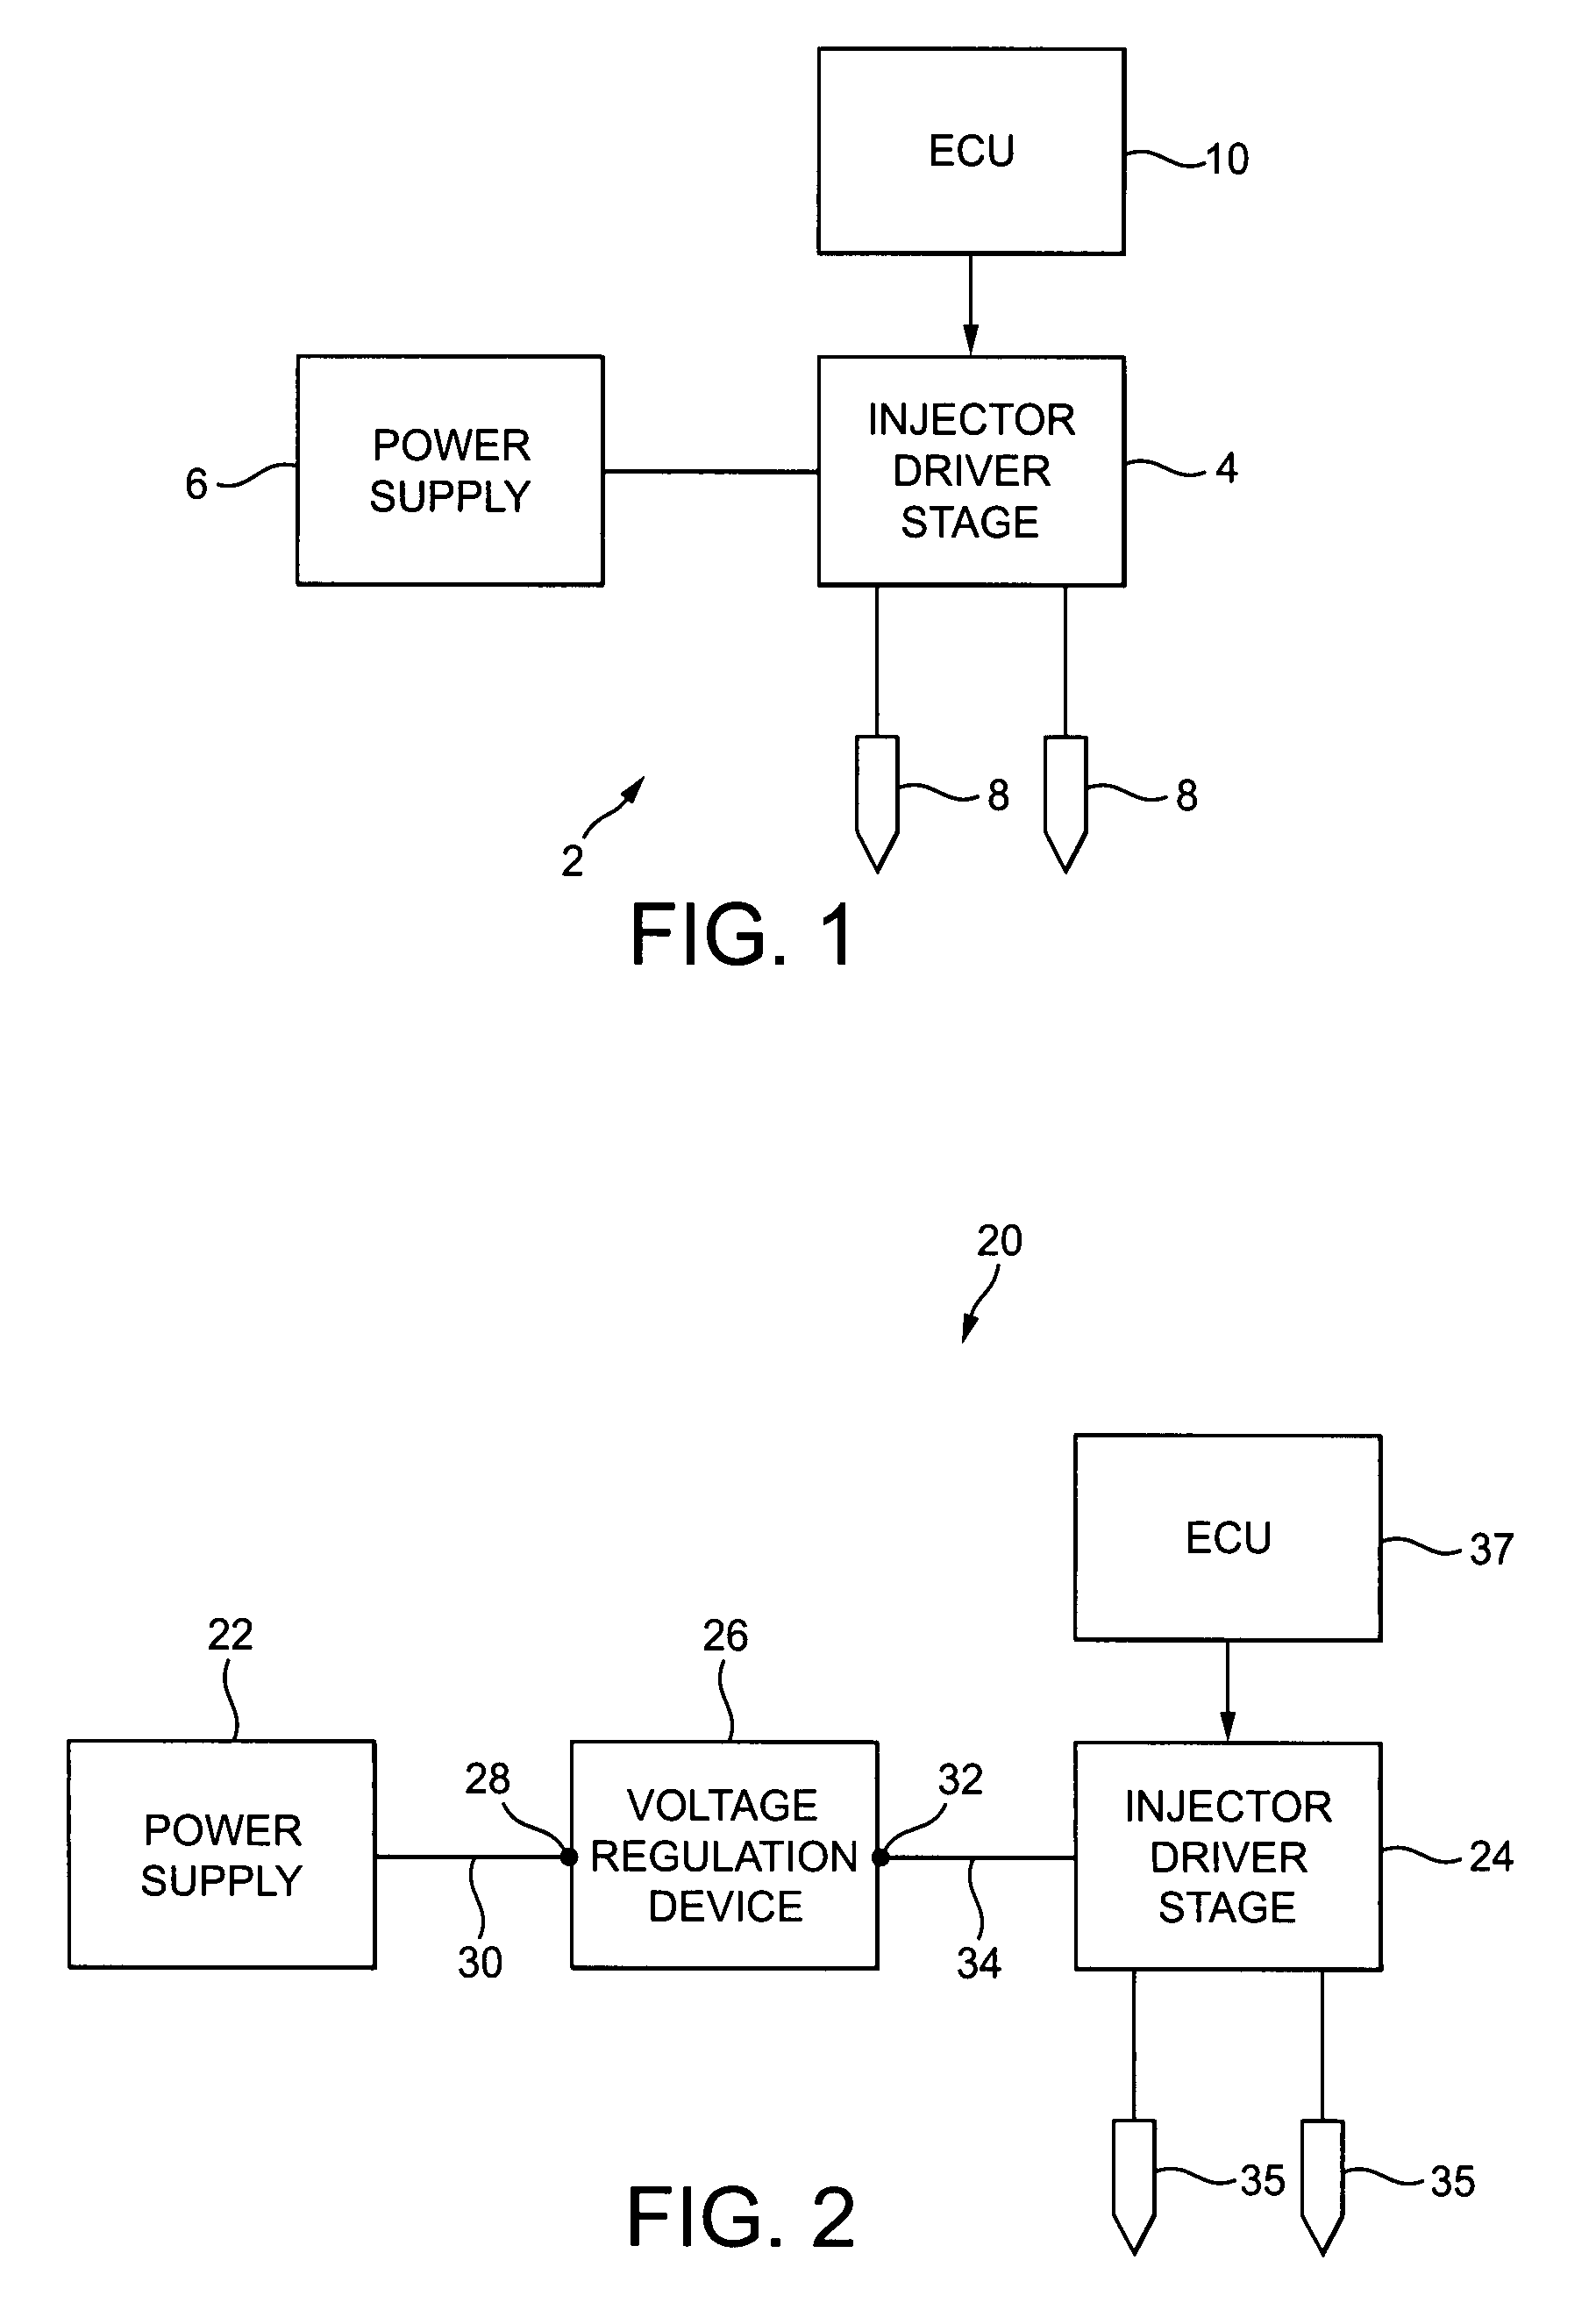 Electrical drive arrangement for a fuel injection system